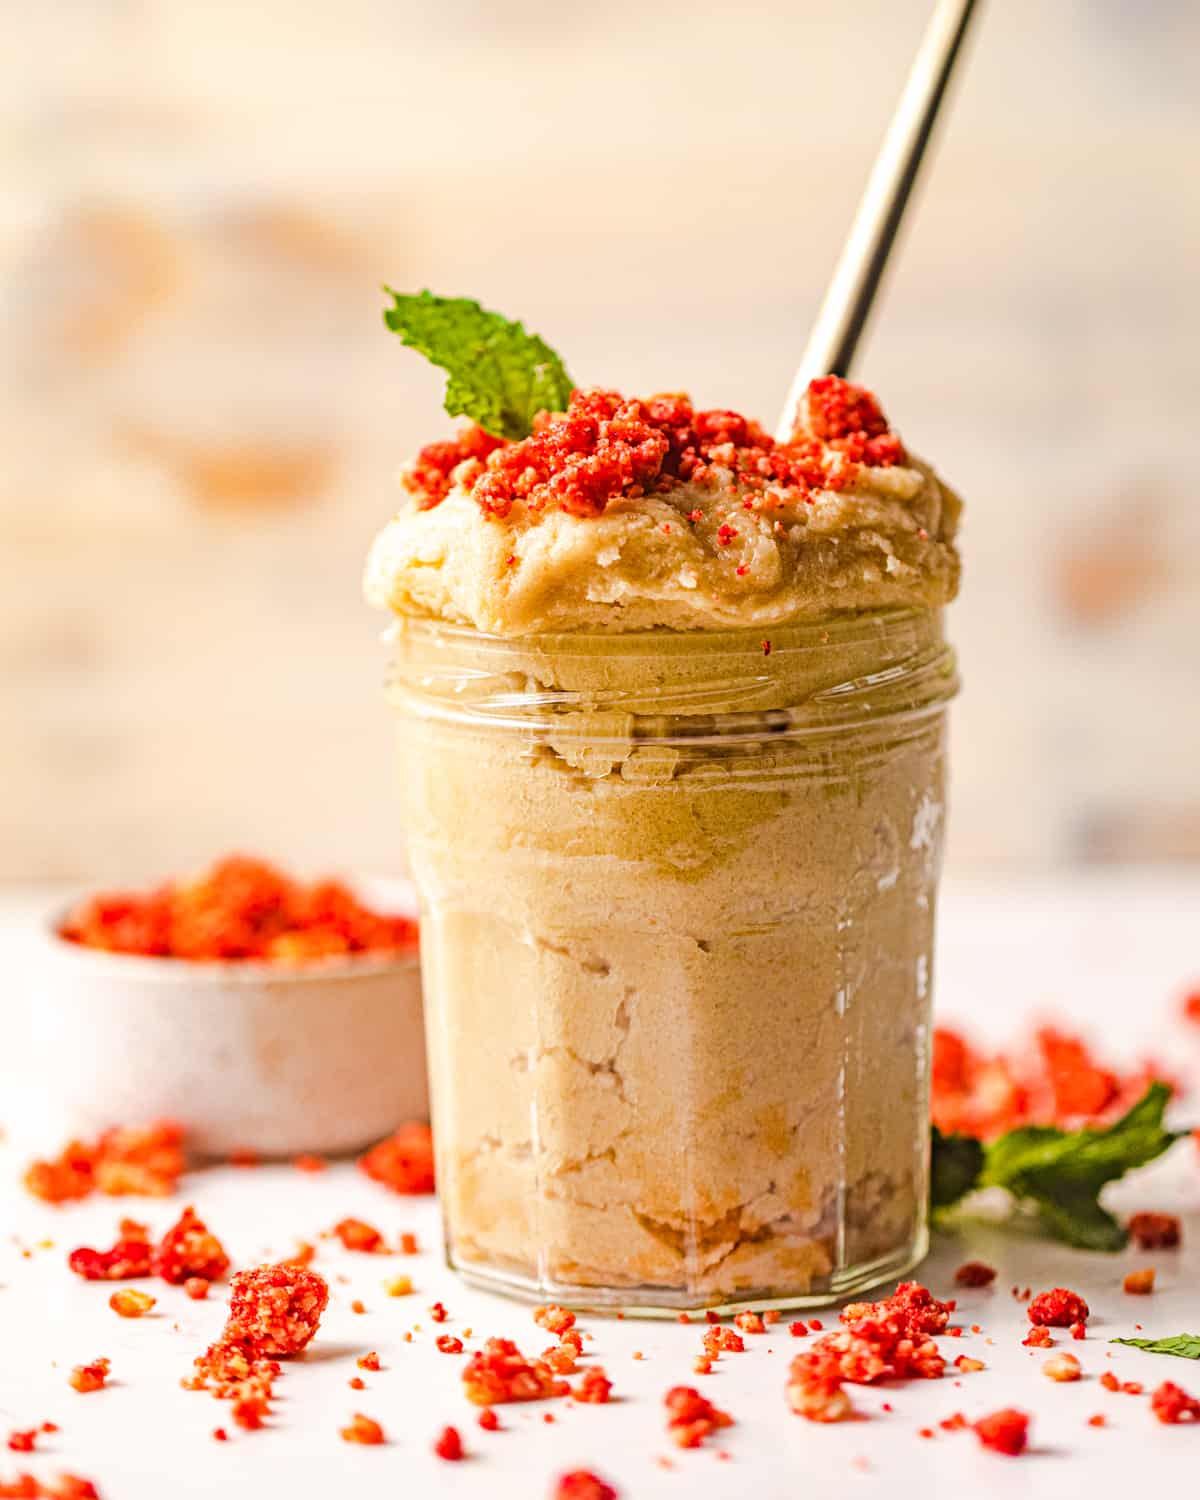 edible sugar cookie dough in a jar with strawberry crumbles on top.